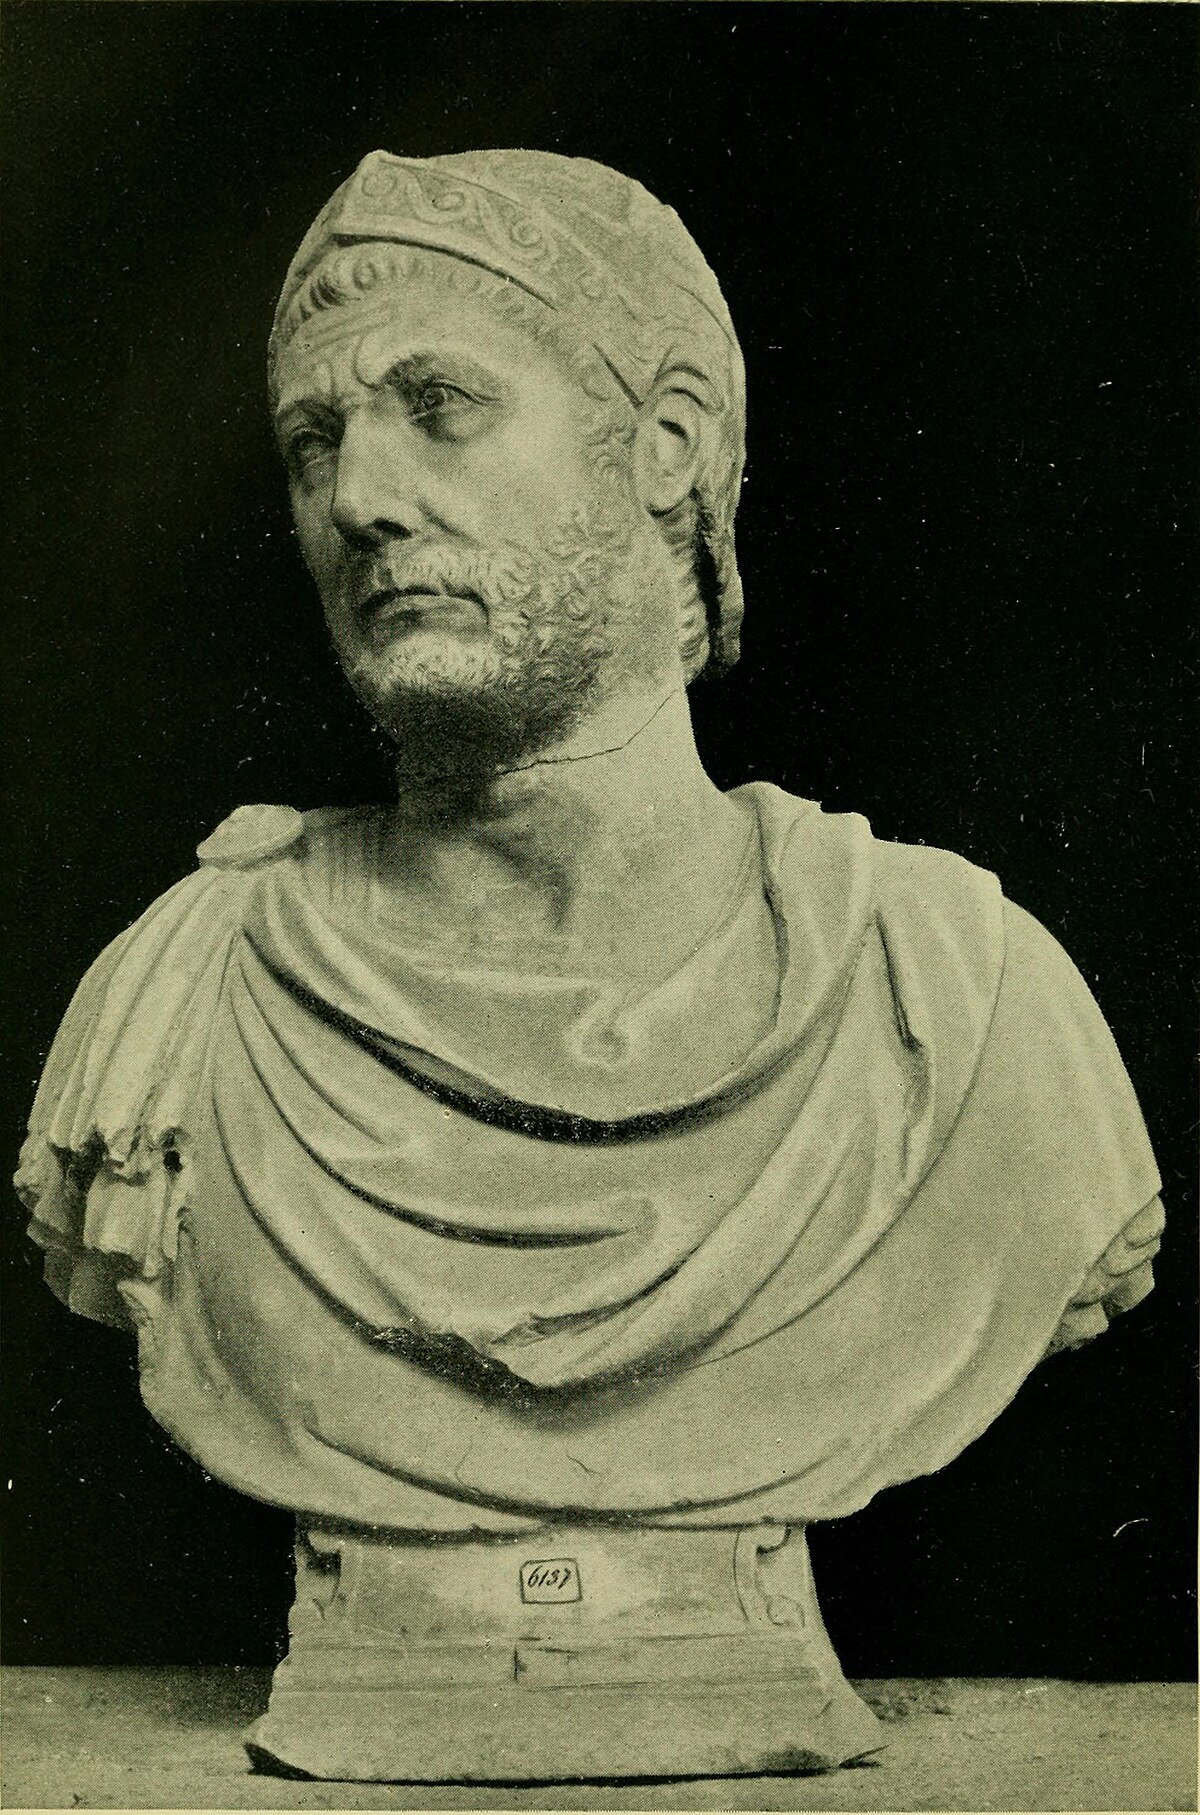 Capuan bust of Hannibal - Wikipedia